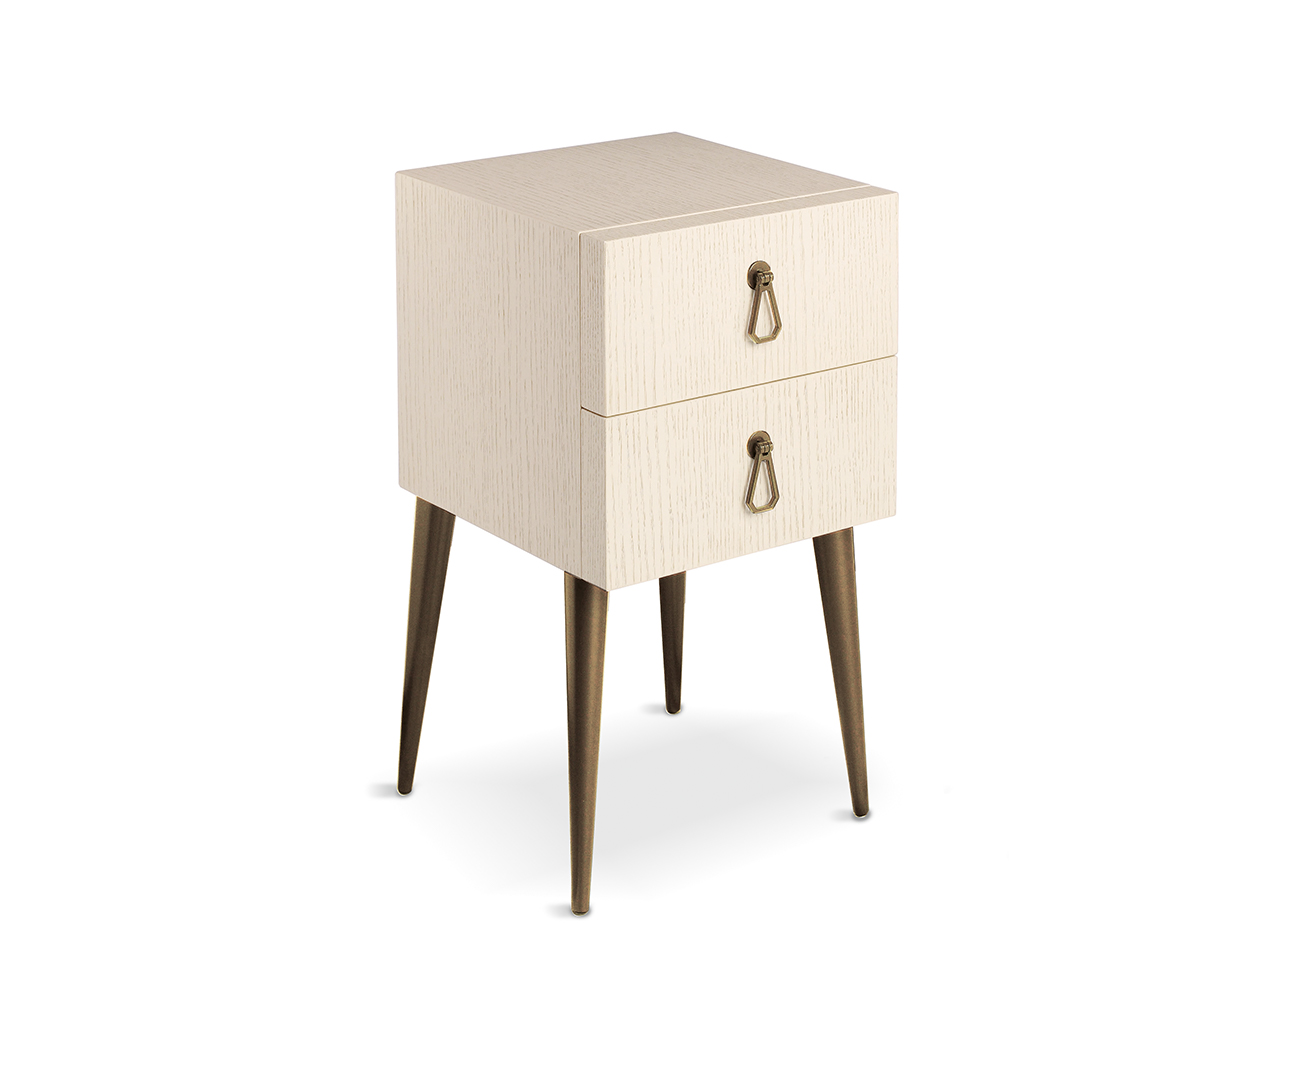 City bedside table - Cantori